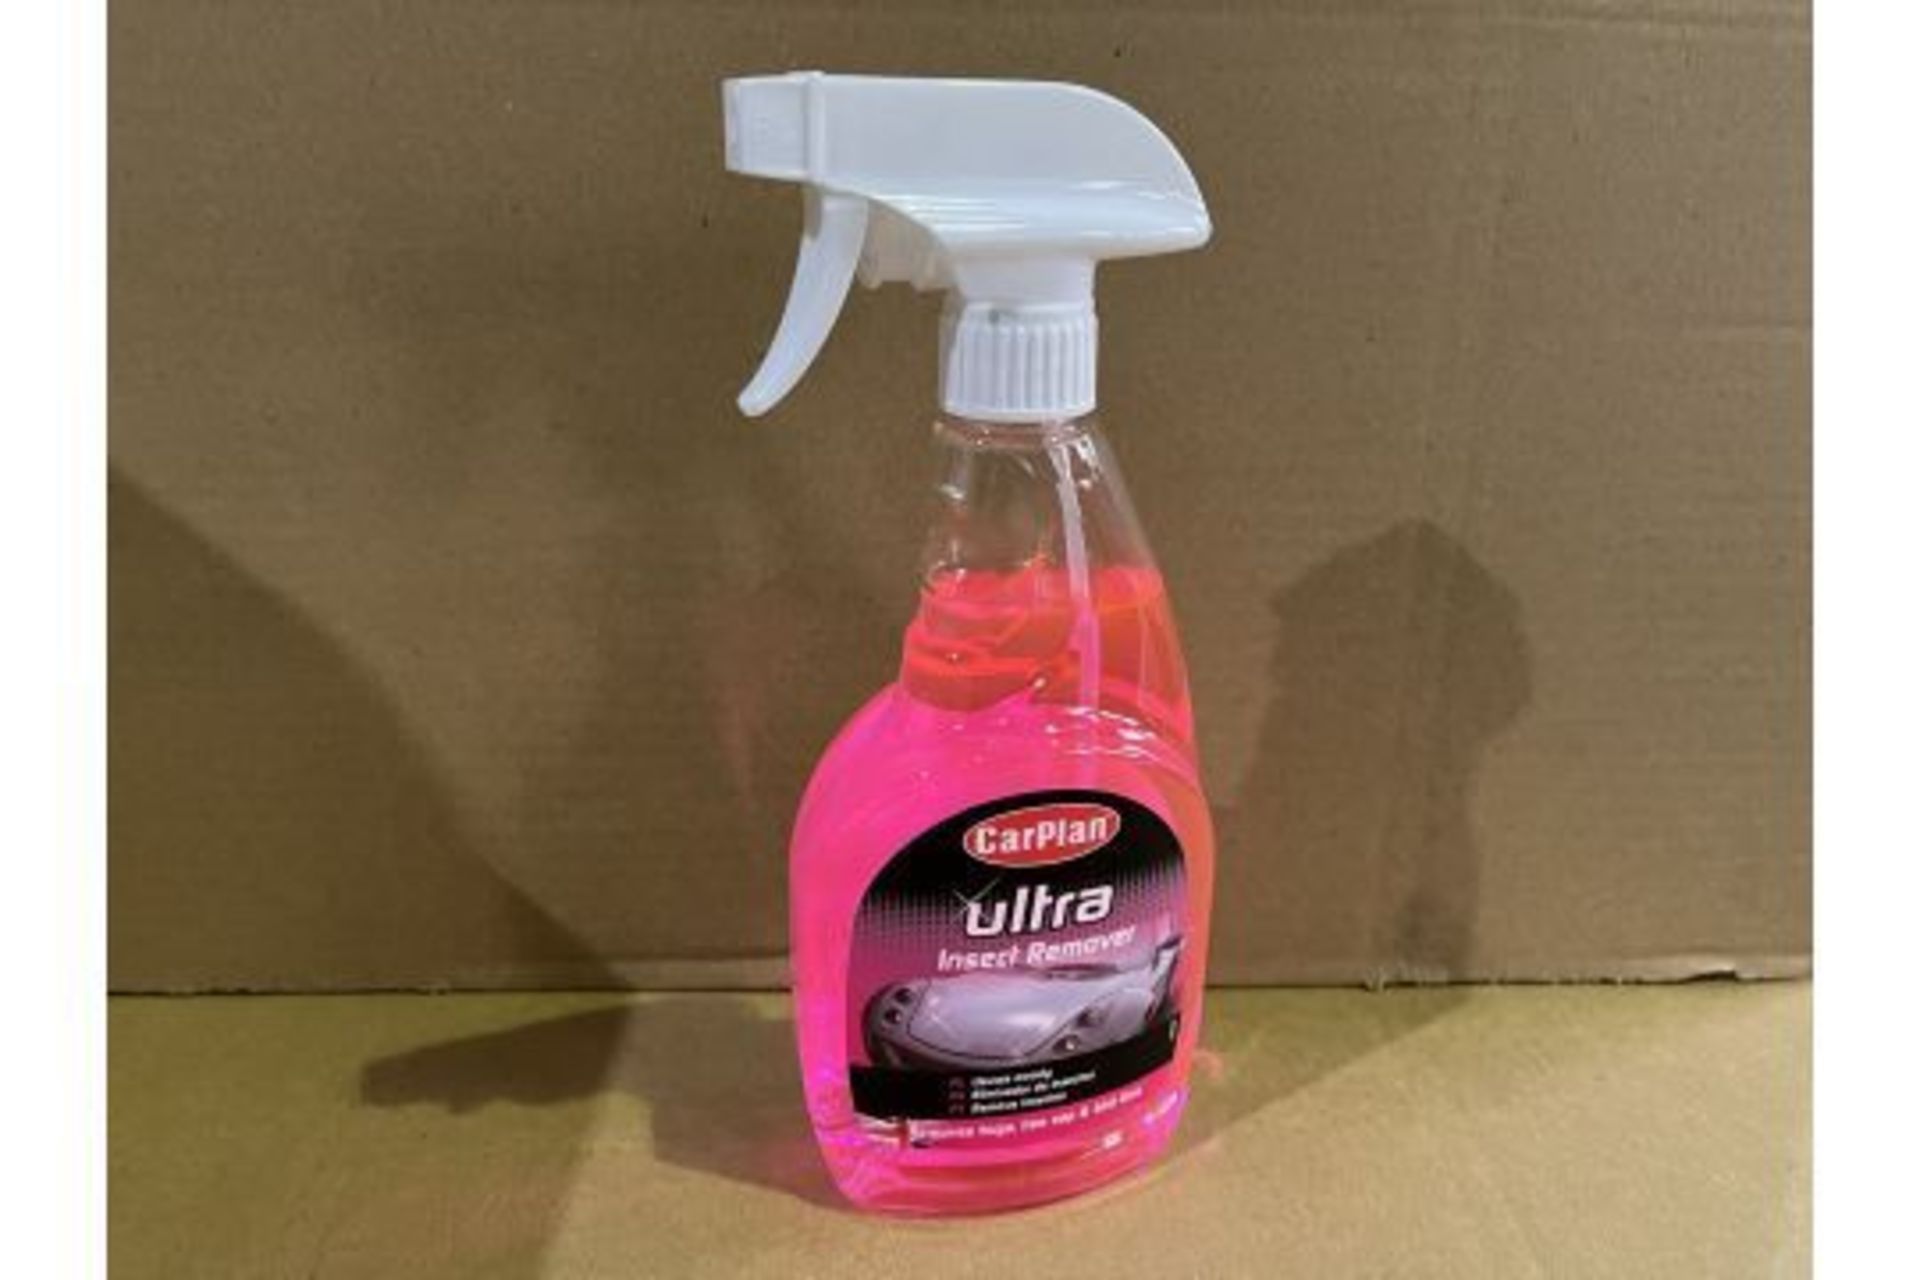 72 X 500ML SPRAY BOTTLES OF CARREFOUR INSECT REMOVER. (ROW9)